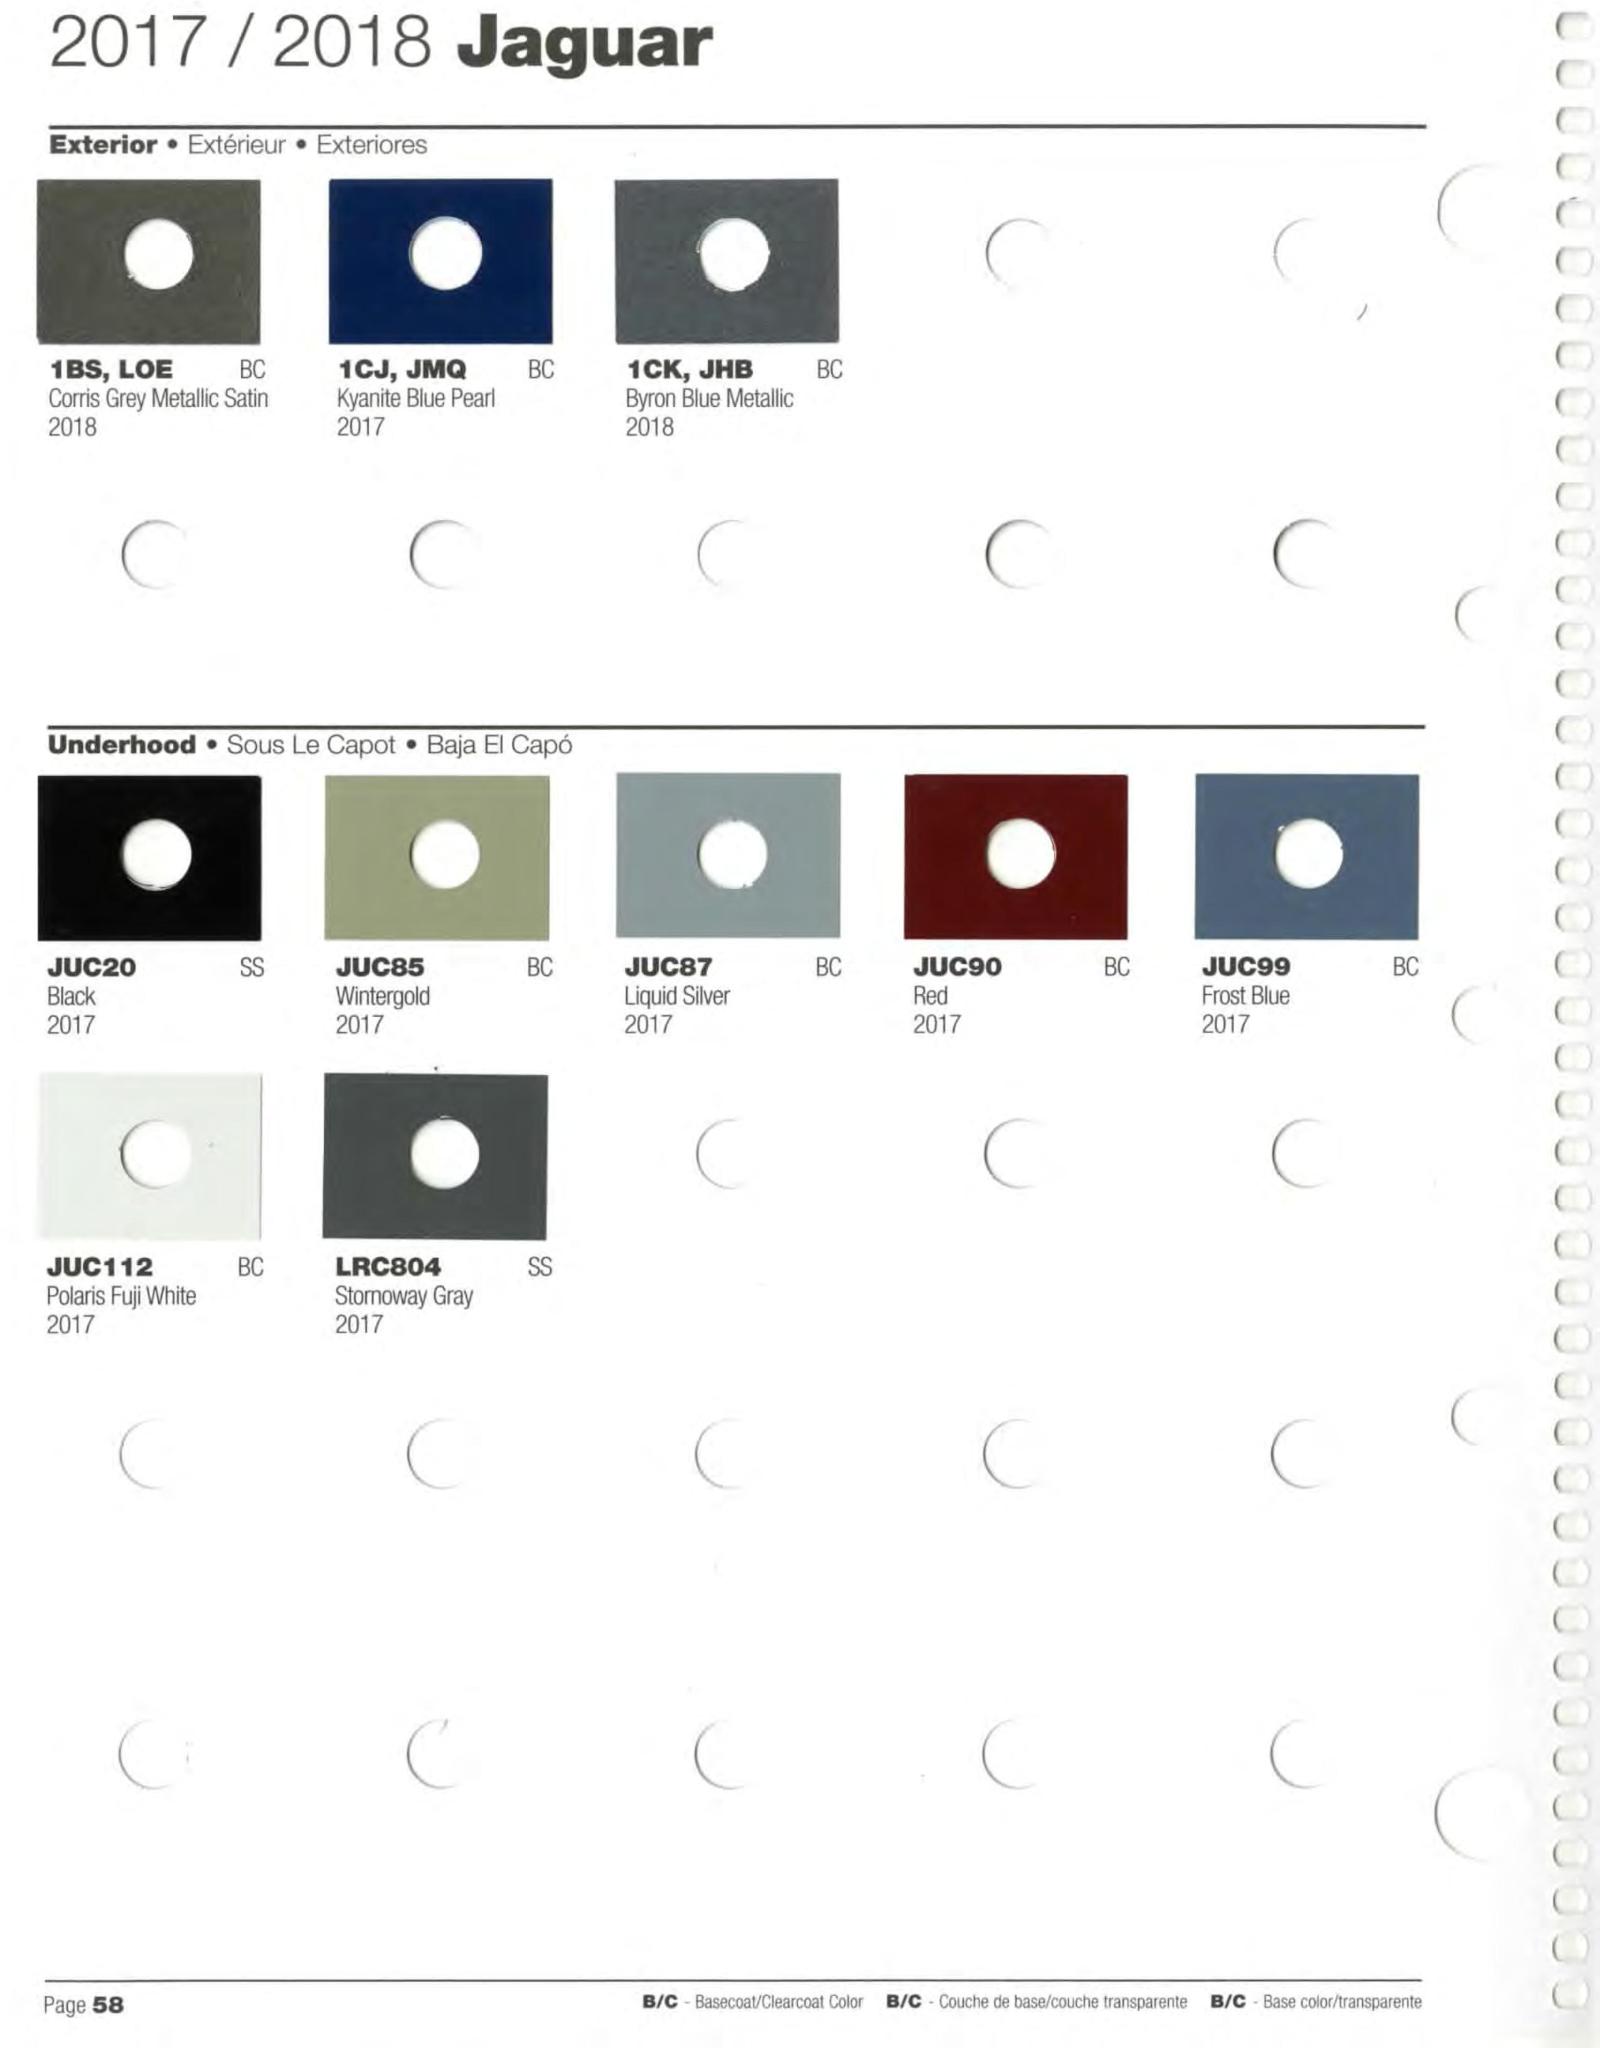 paint swatches and codes used on jaguar vehicles